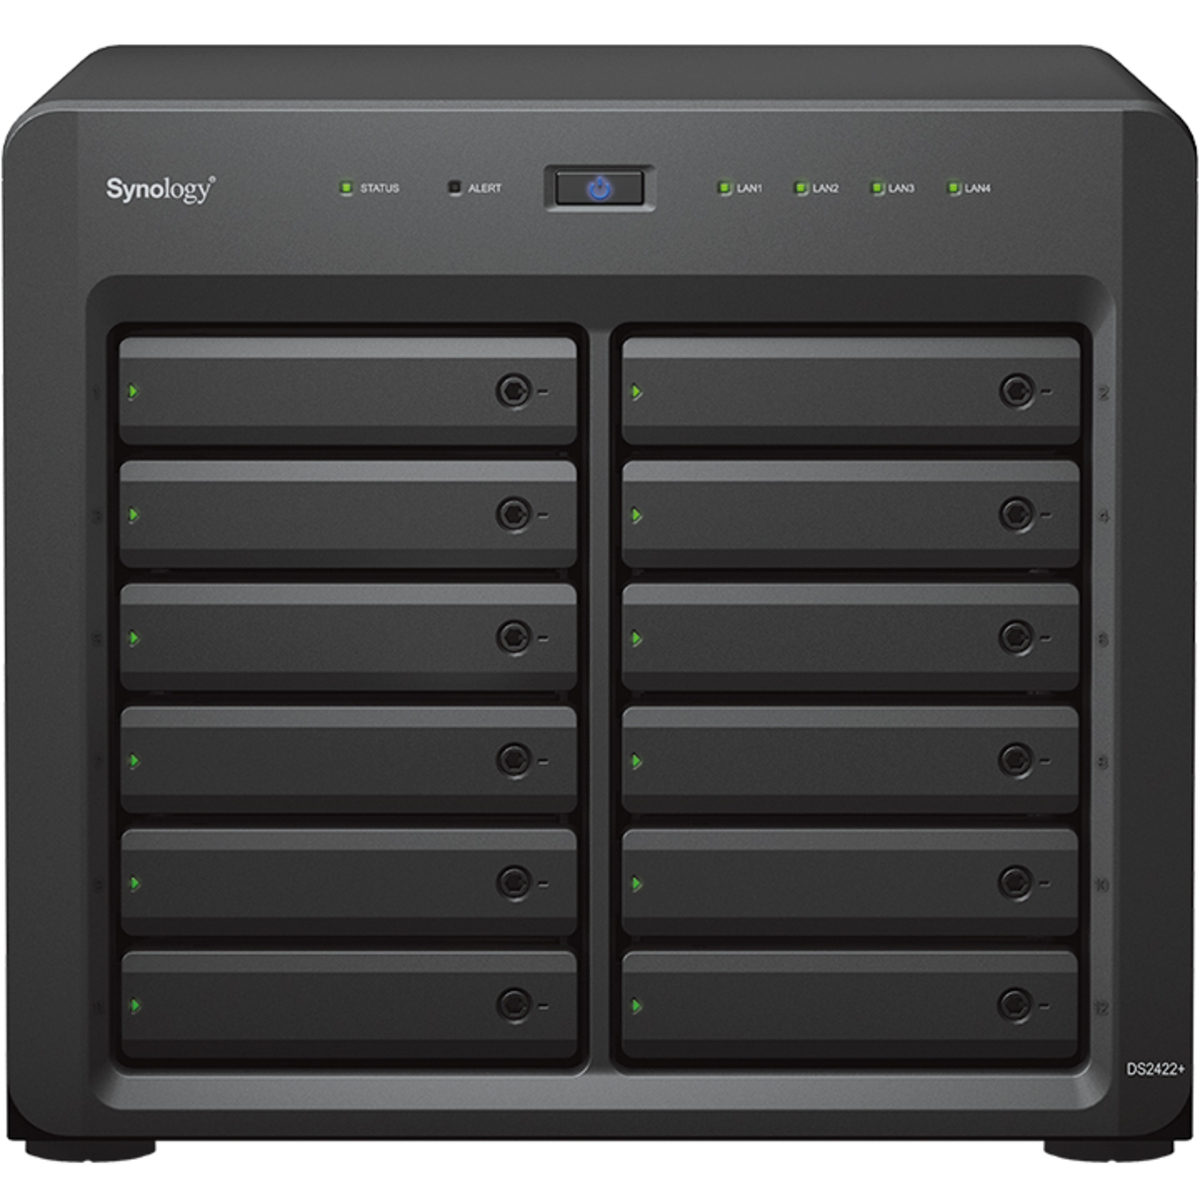 Synology DiskStation DS2422+ 144tb 12-Bay Desktop Multimedia / Power User / Business NAS - Network Attached Storage Device 8x18tb Toshiba Enterprise Capacity MG09ACA18TE 3.5 7200rpm SATA 6Gb/s HDD ENTERPRISE Class Drives Installed - Burn-In Tested - FREE RAM UPGRADE DiskStation DS2422+